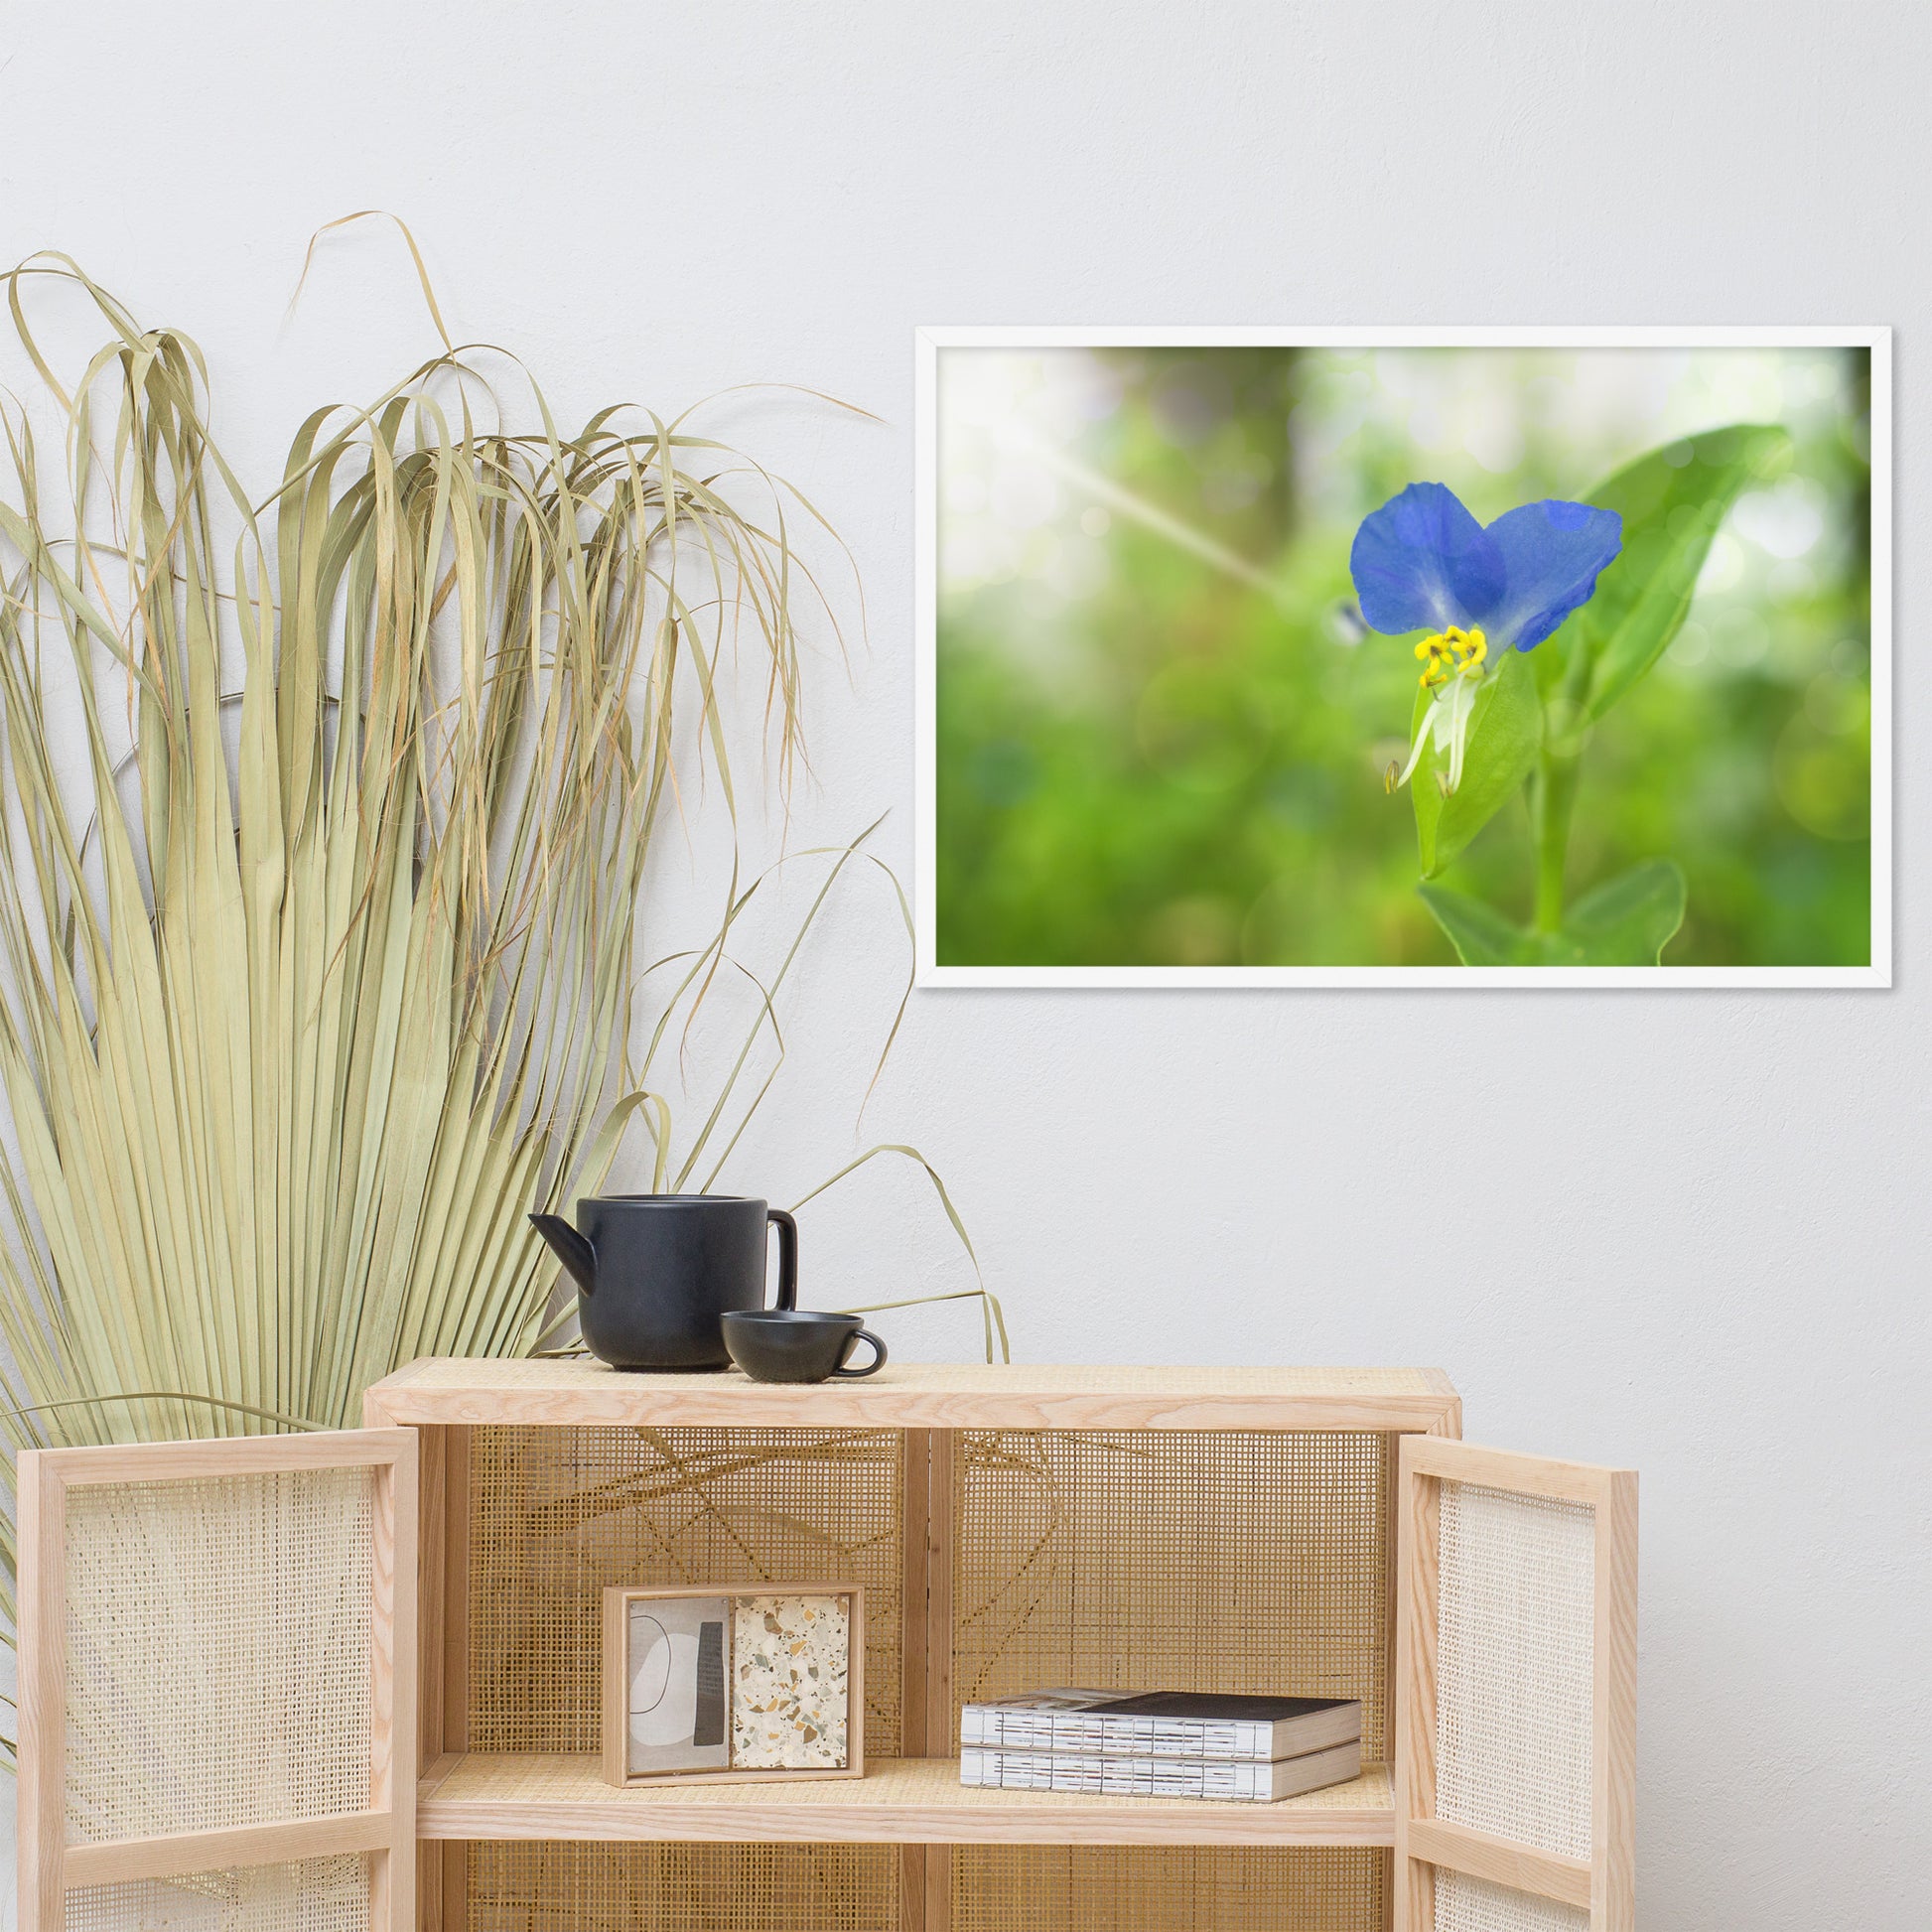 Colorful Wall Art For Kitchen: Asiatic Dayflower - Floral / Botanical / Nature Photo Framed Wall Art Print - Artwork - Modern Wall Decor